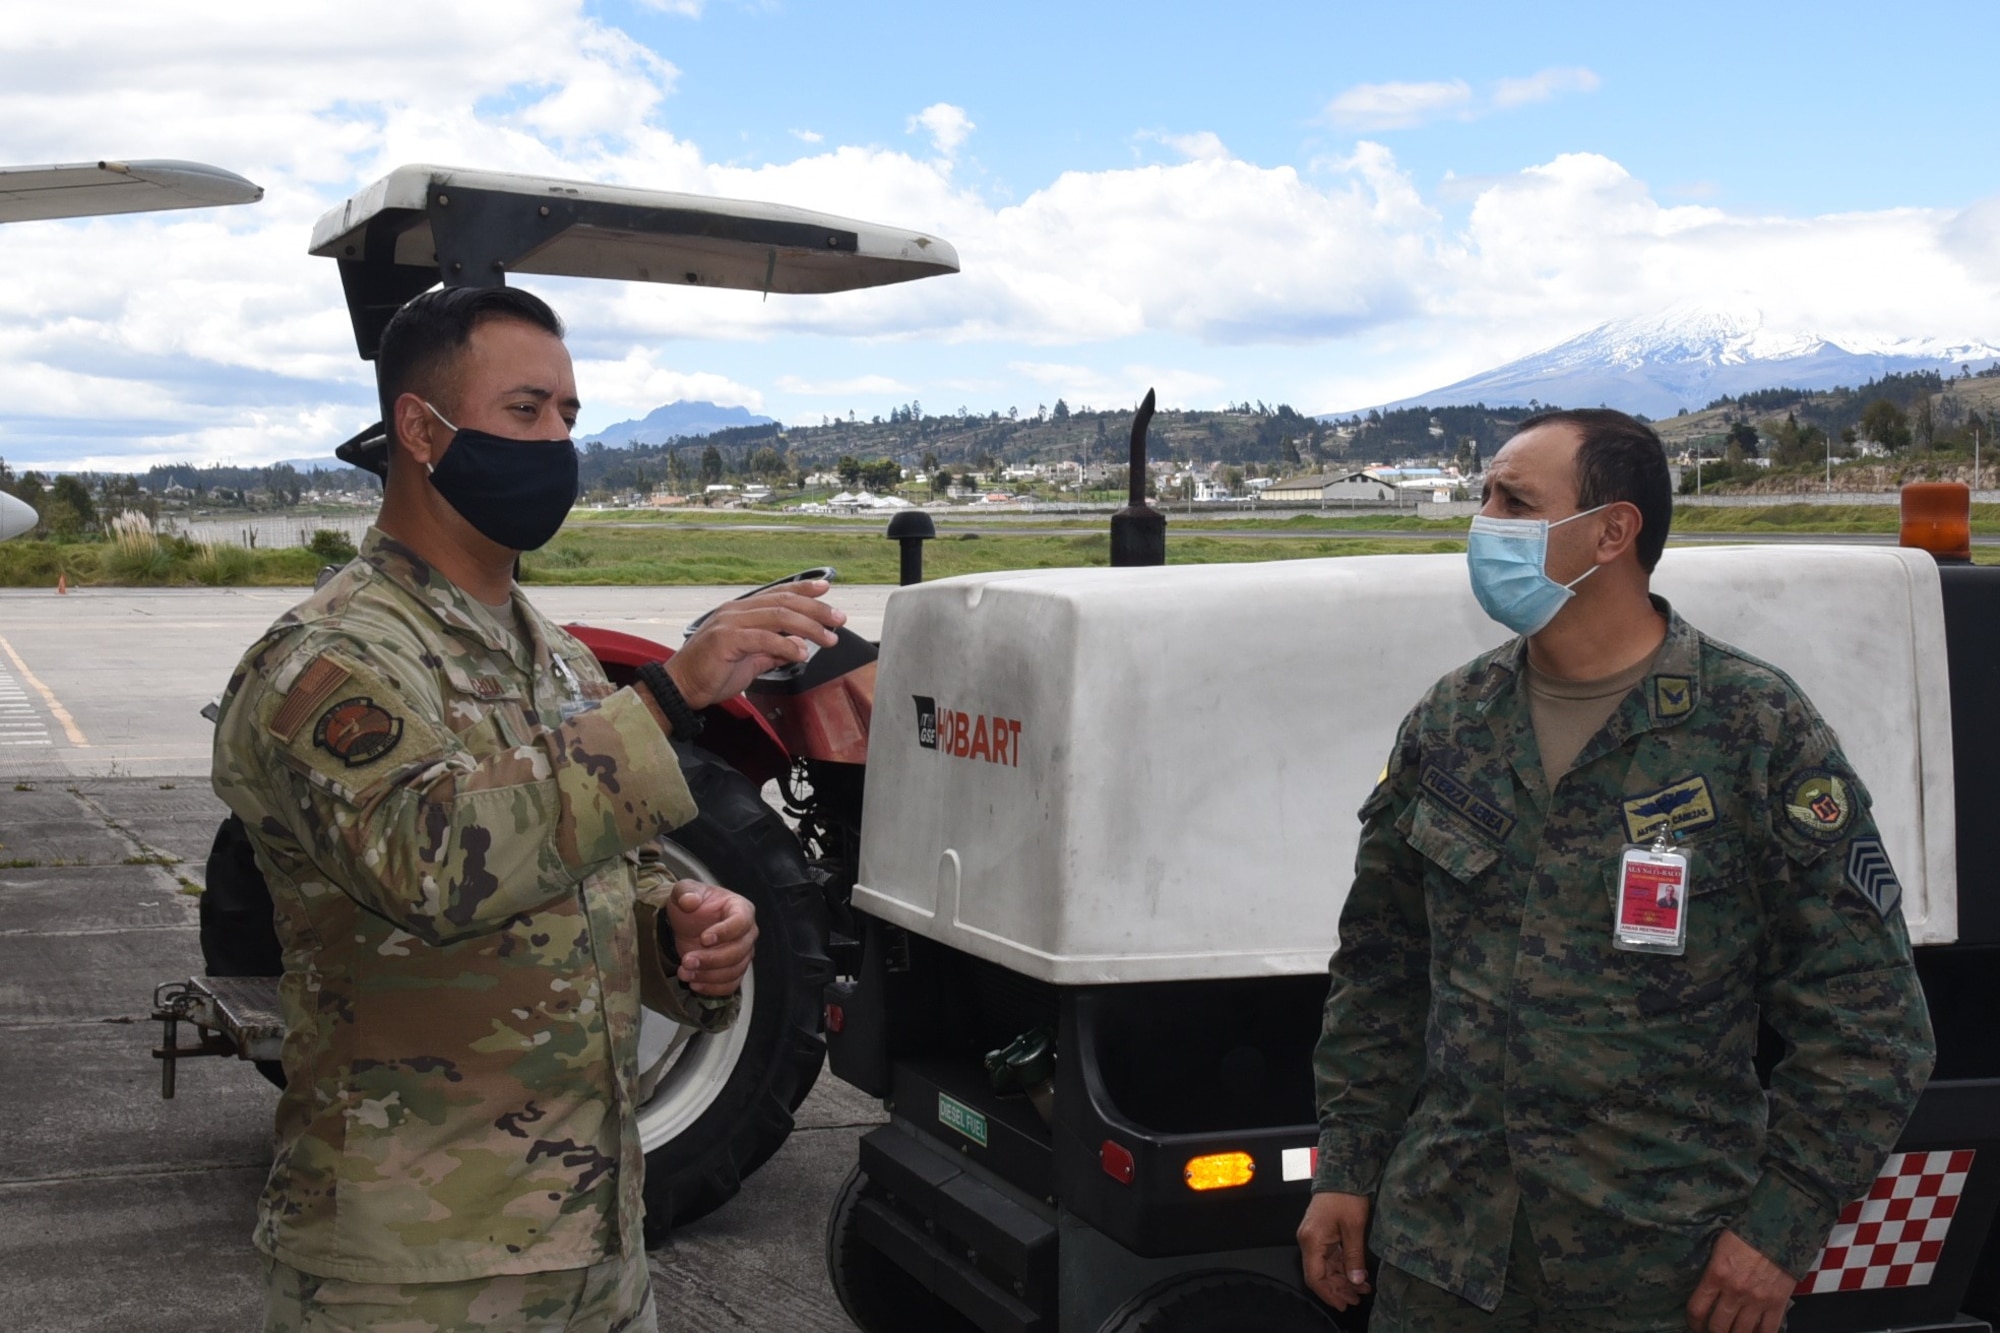 U.S. Air Force Tech. Sgt. Luis Ochoa, 571st Mobility Support Advisory Squadron vehicle management lead air advisor, shares his vehicle maintenance expertise with members of the Fuerza Aérea Ecuatoriana by discussing the complex structure to support air forces at any level July 16, 2020, at Cotopaxi Air Force Base in Latacunga, Ecuador. (U.S. Air Force photo by Master Sgt. Freddy Muñoz)